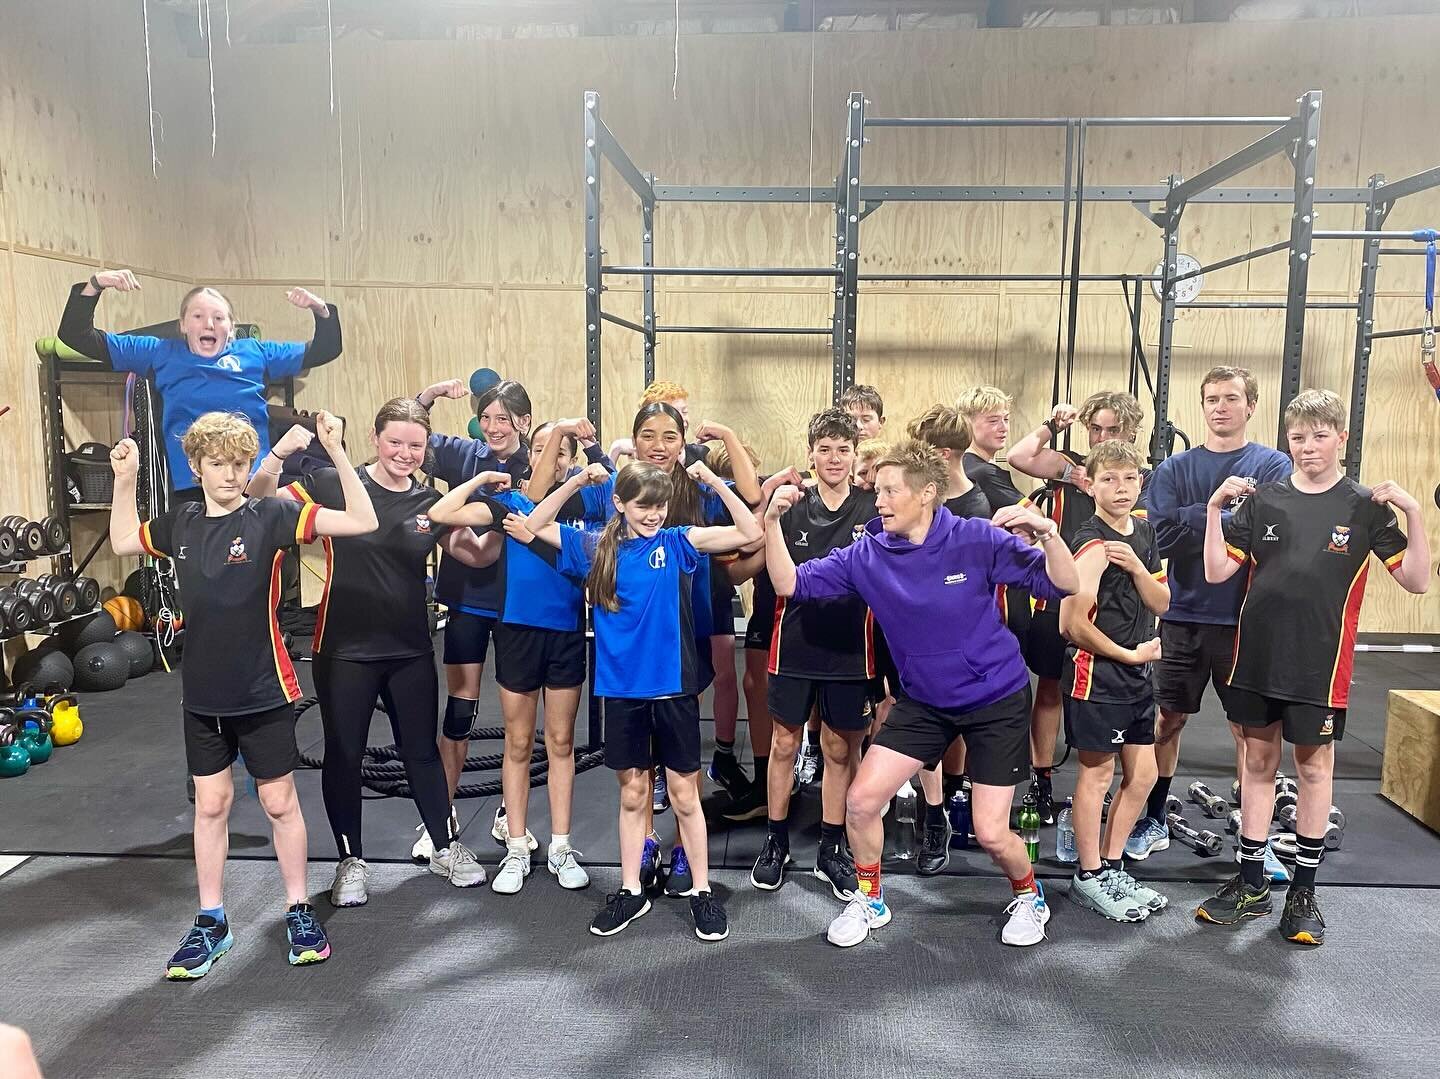 What a awesome morning at BLAST 💥

A massive mihi to Teresa at @nrgalexandra for taking the team through an intense circuit workout 💪🏼🏋️&zwj;♂️🥵 Our rangatahi will be fighting fit for the Longest Day next week! 💥